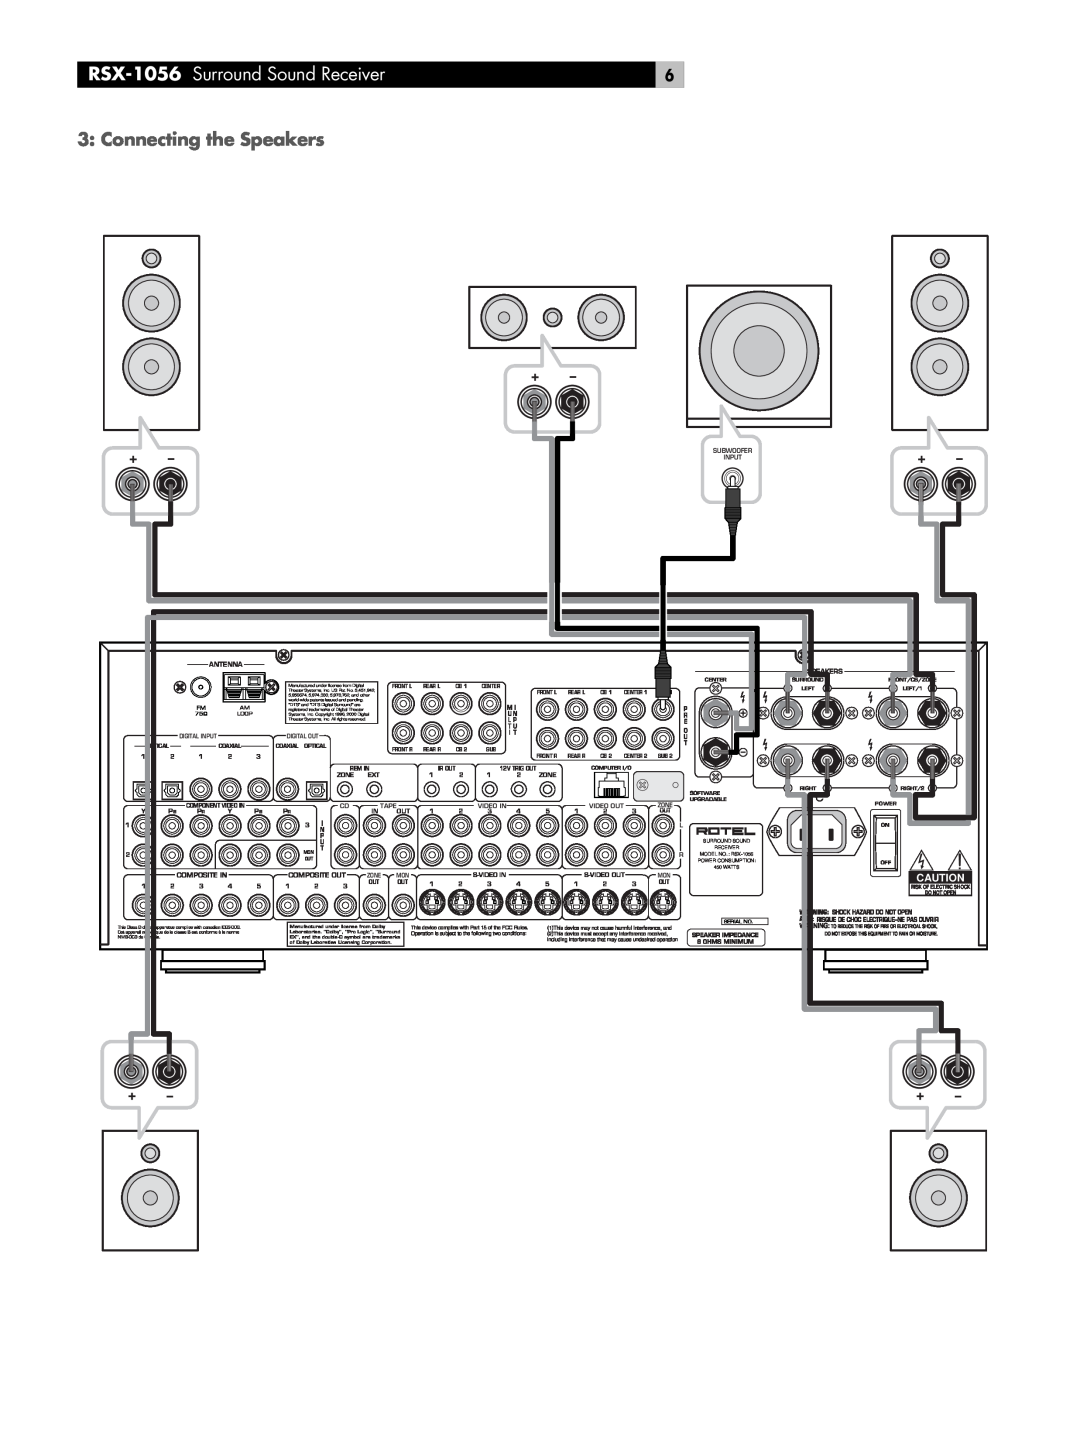 Rotel owner manual 3: Connecting the Speakers, RSX-1056 Surround Sound Receiver 